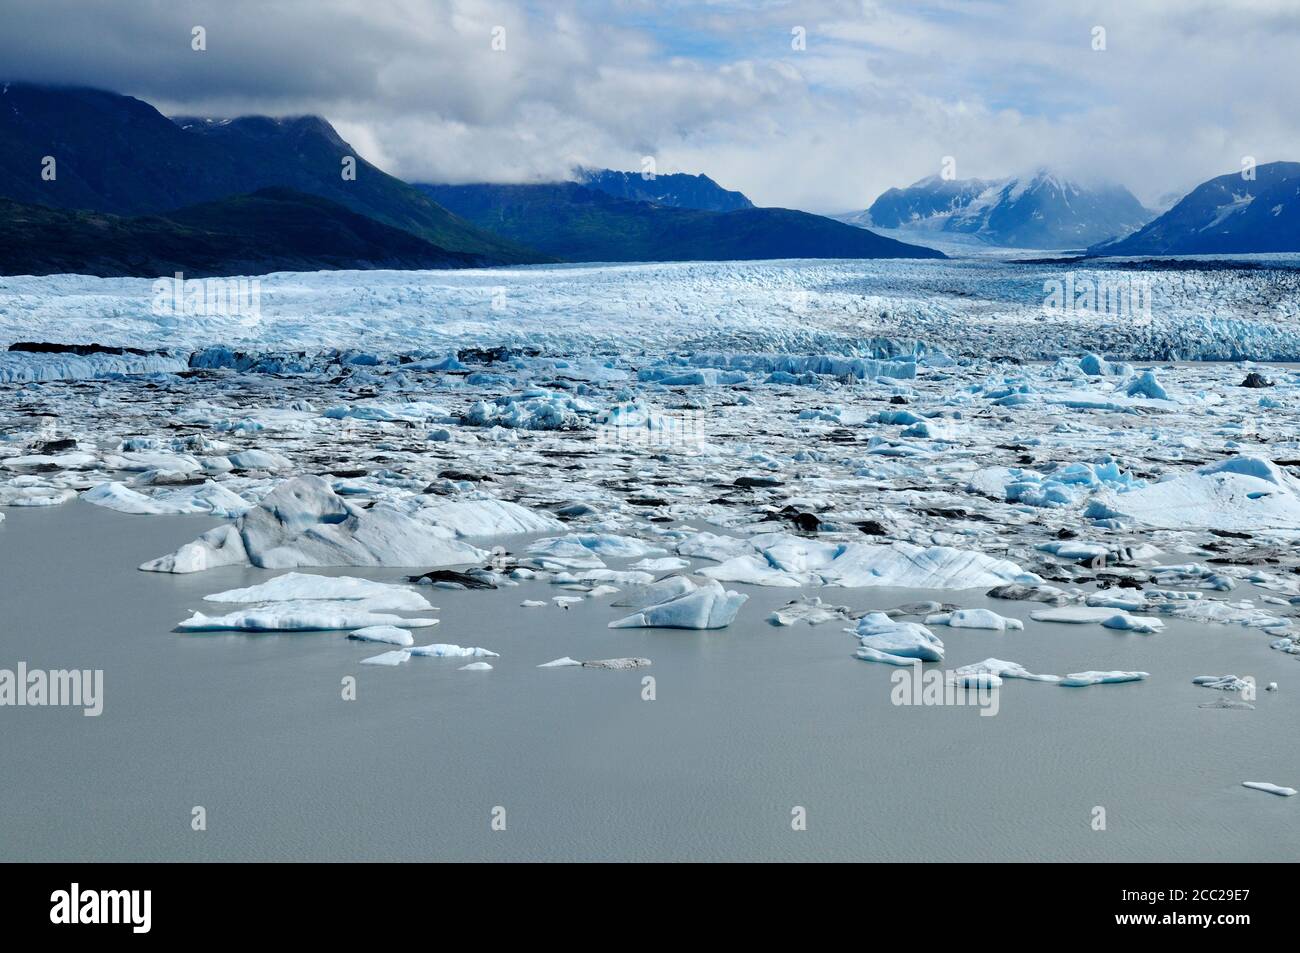 USA, Alaska, View of Knik Glacier and Chugach Mountains in background Stock Photo